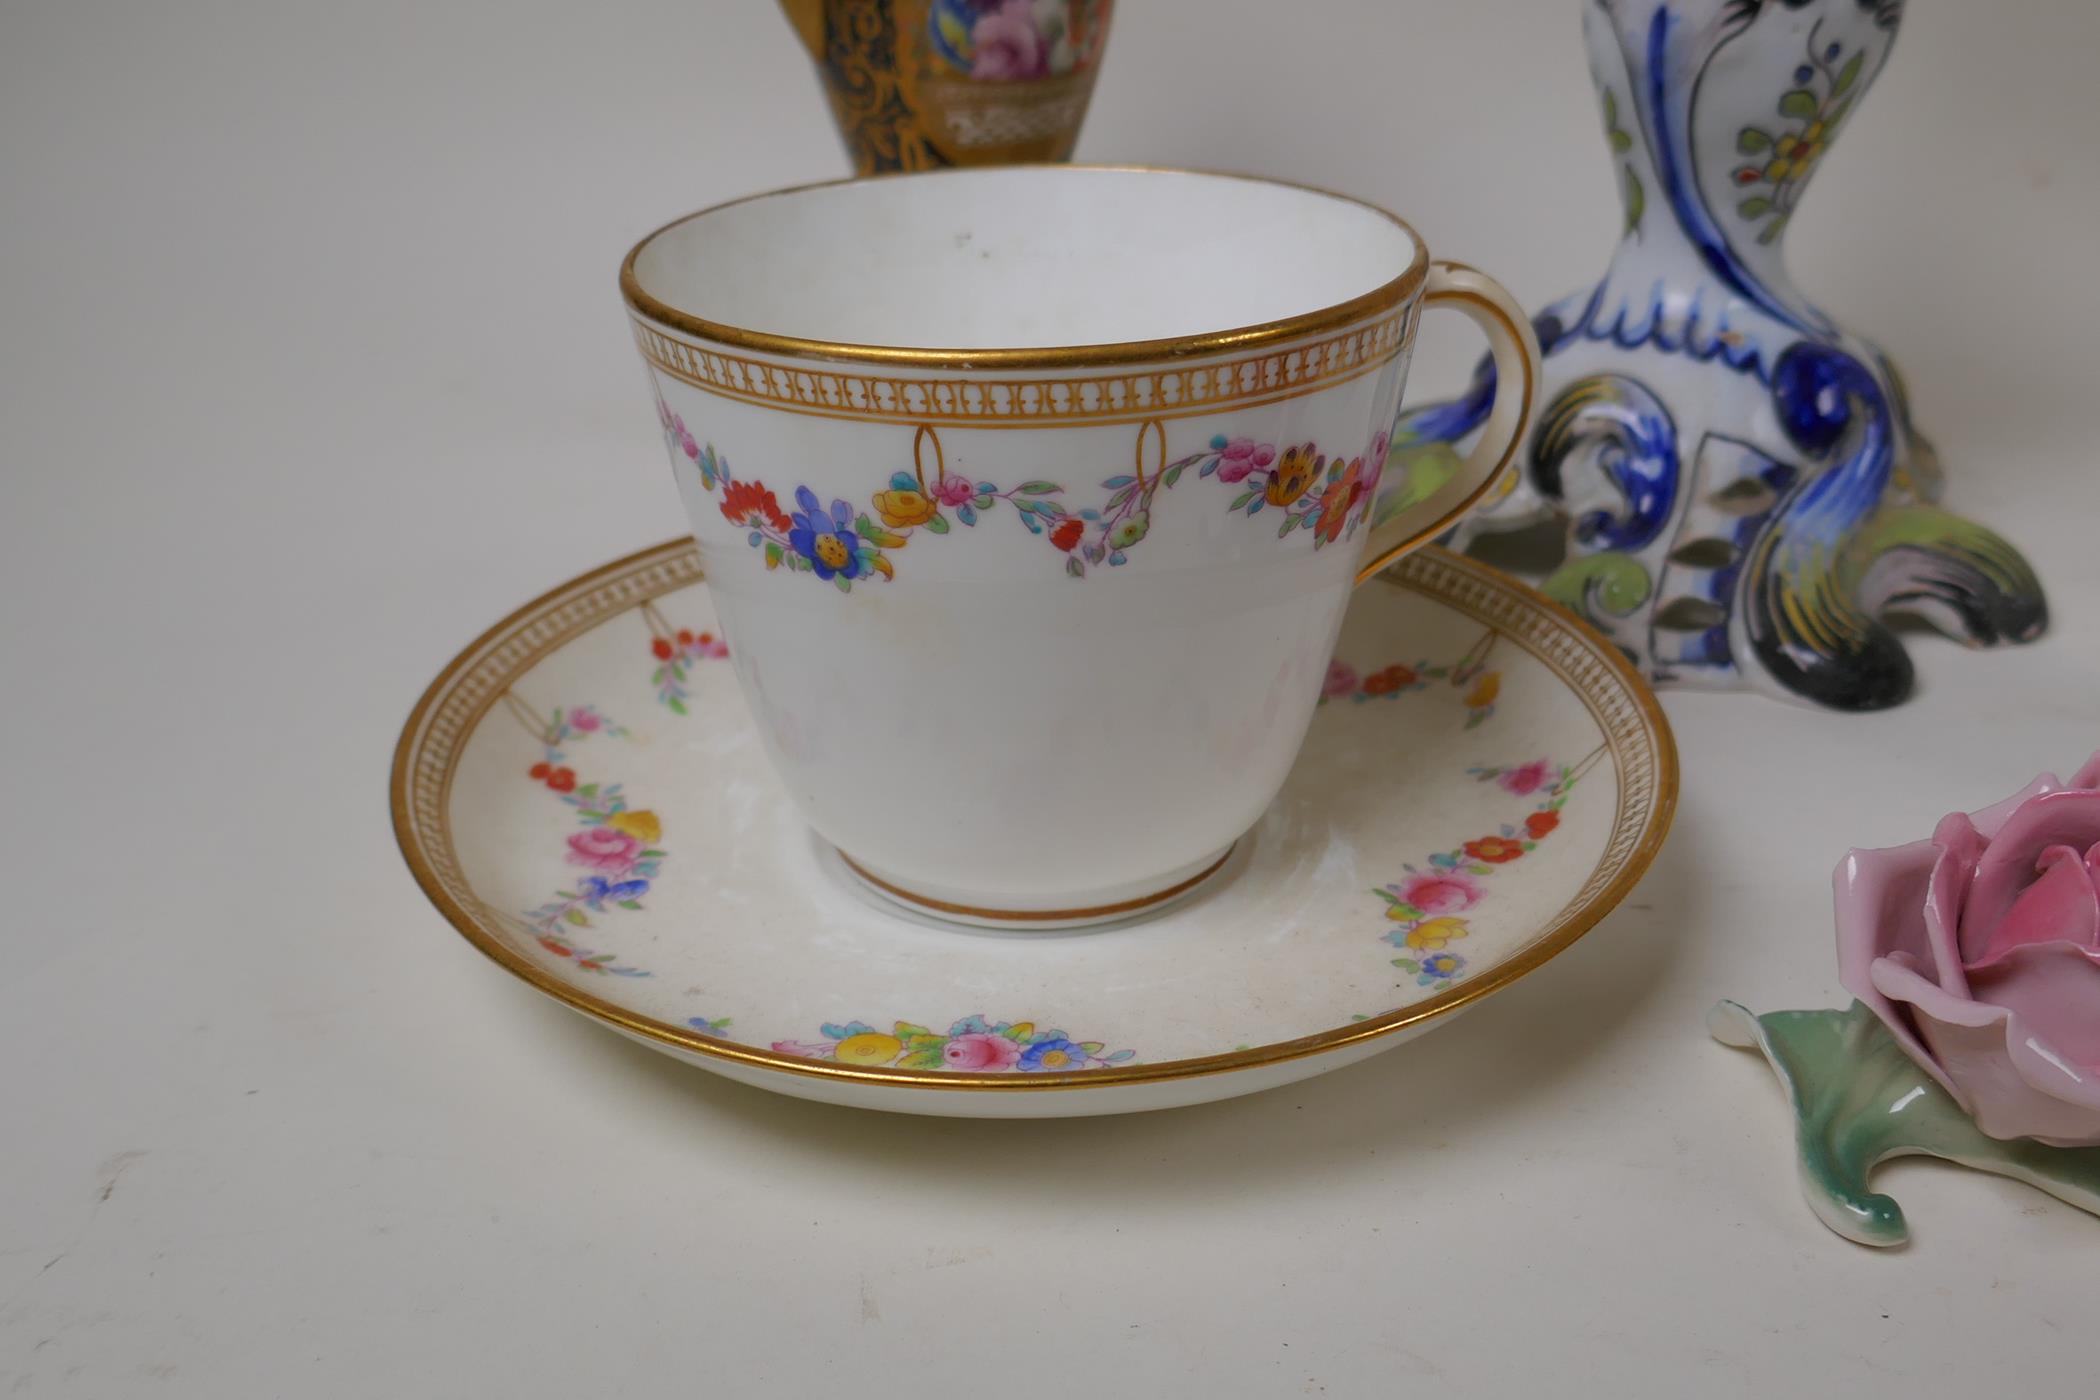 A quantity of C19th and early C20th British and Continental porcelain items including cups, saucers, - Image 6 of 9